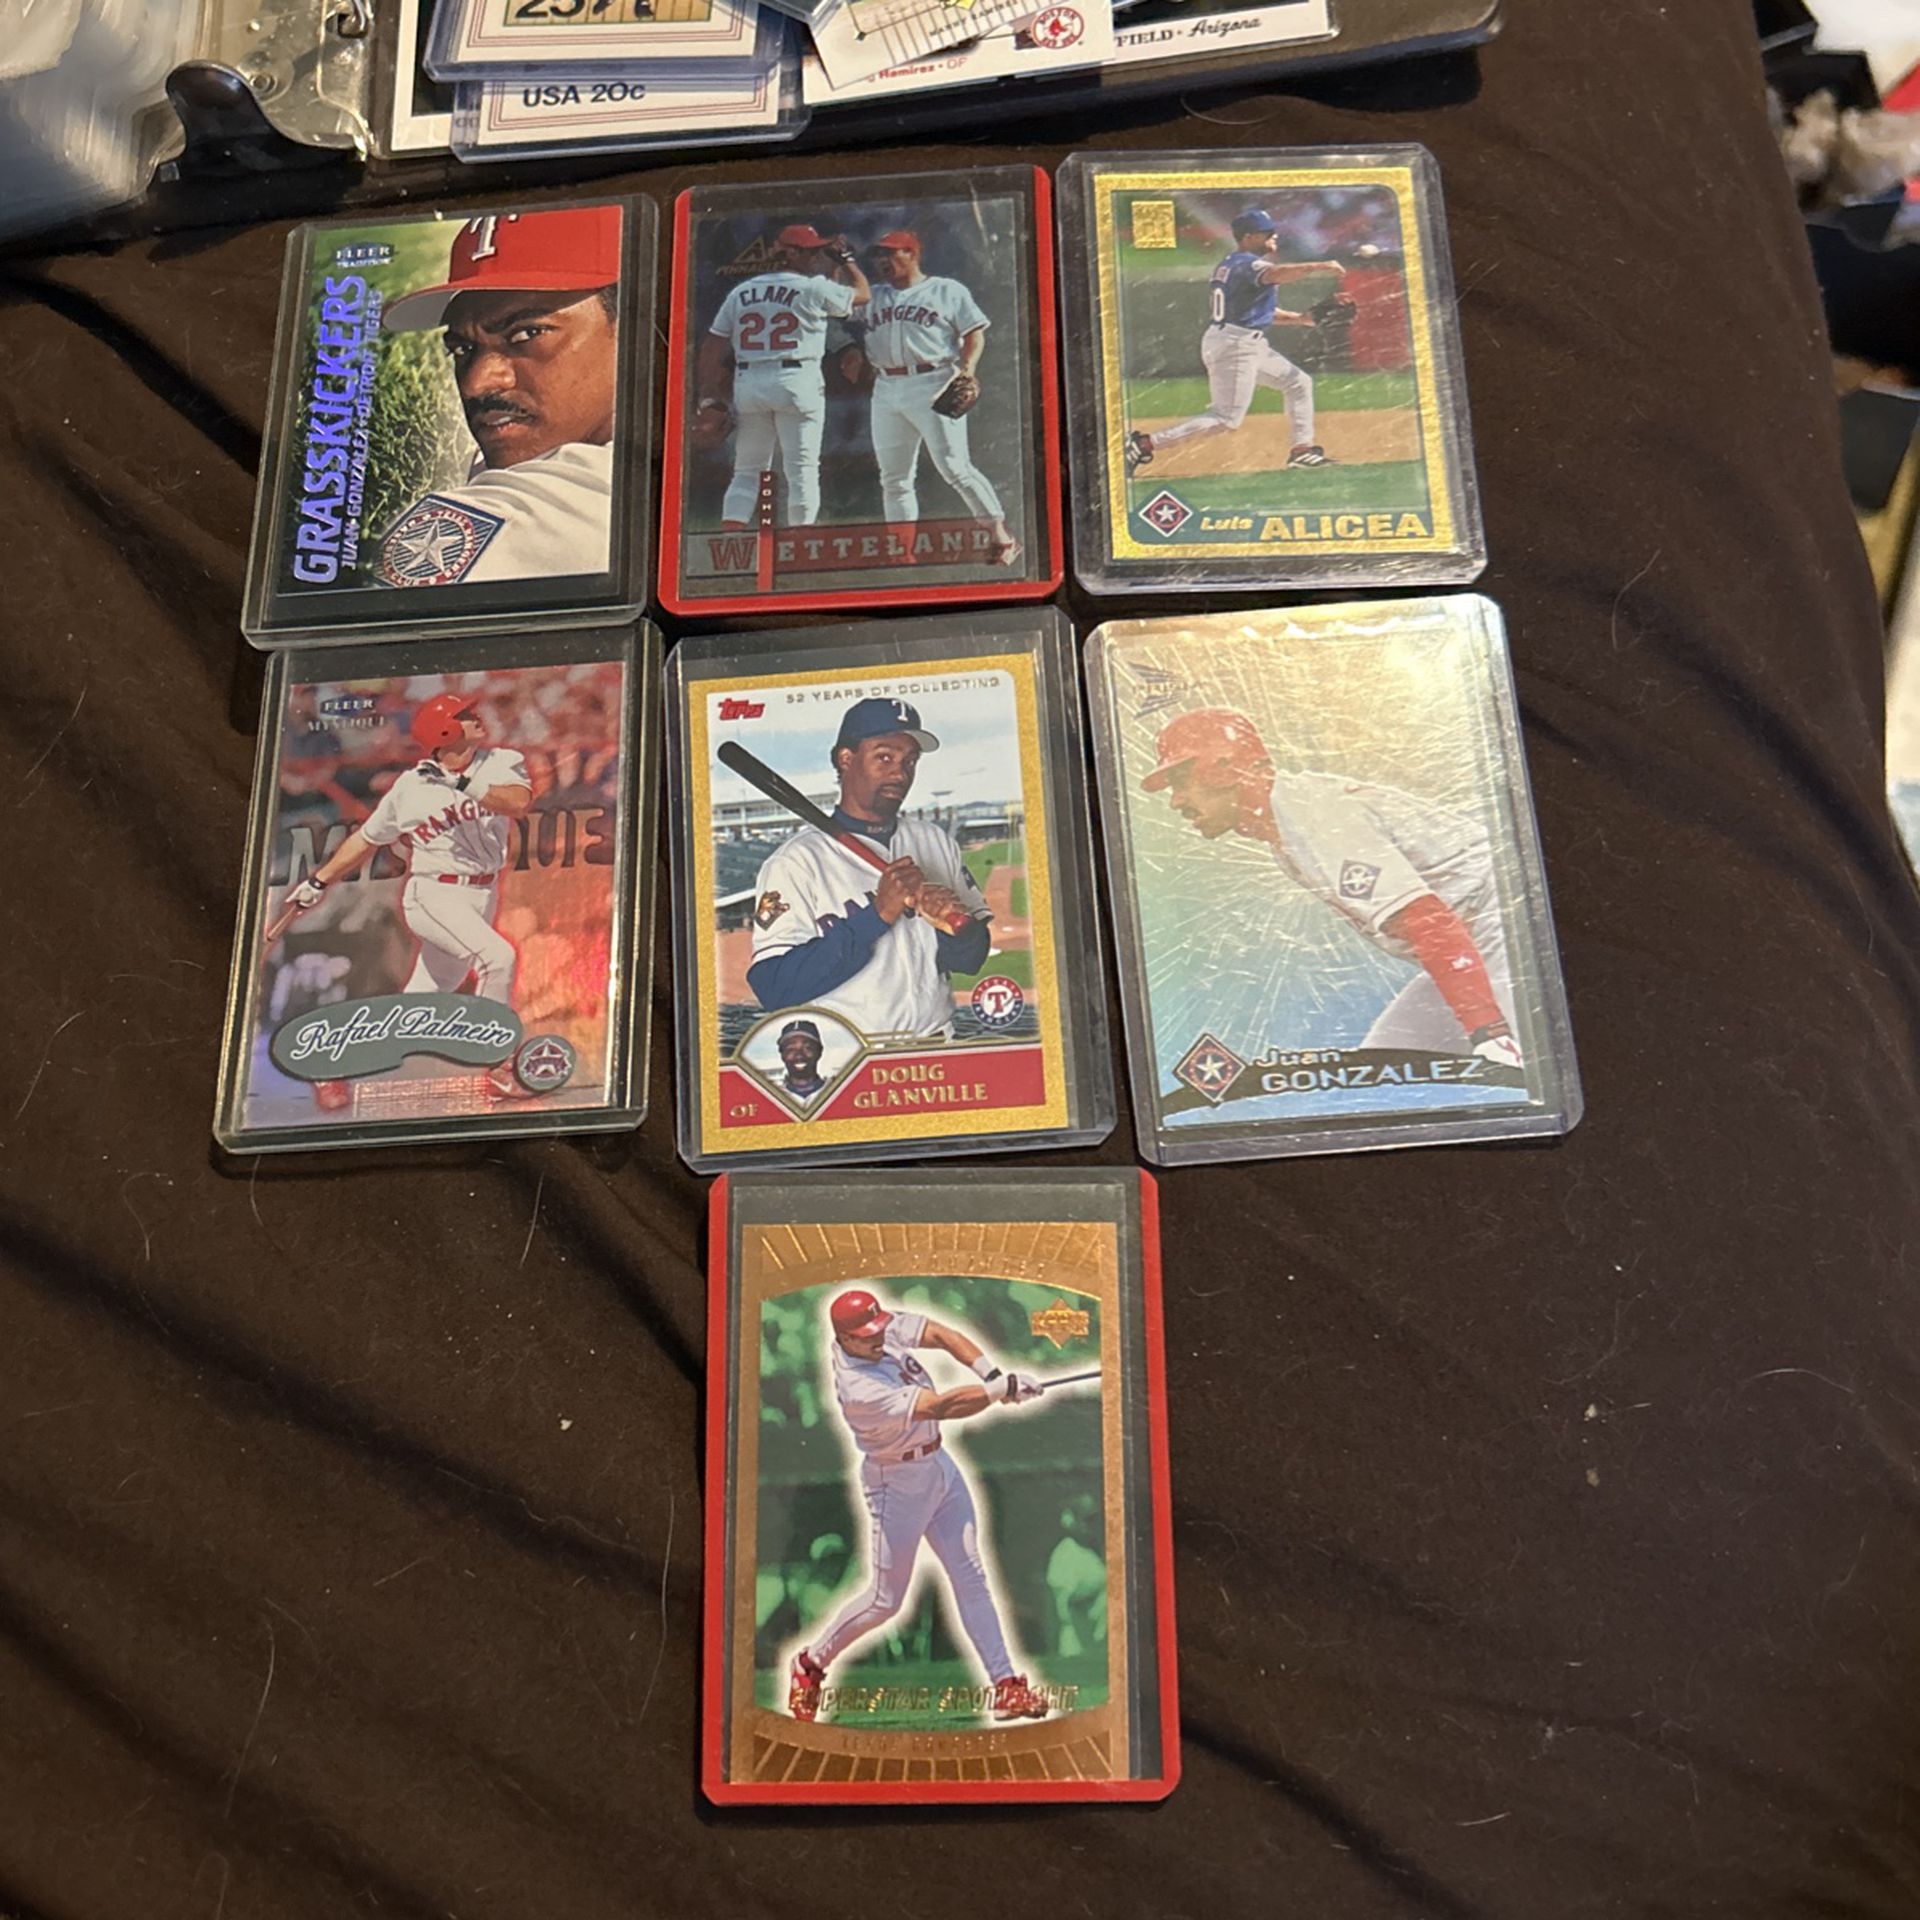 Texas Rangers Baseball Cards Incl. 2 Numbered Cards, 3 Parallels, 3 Inserts And More! All Mint Condition!!